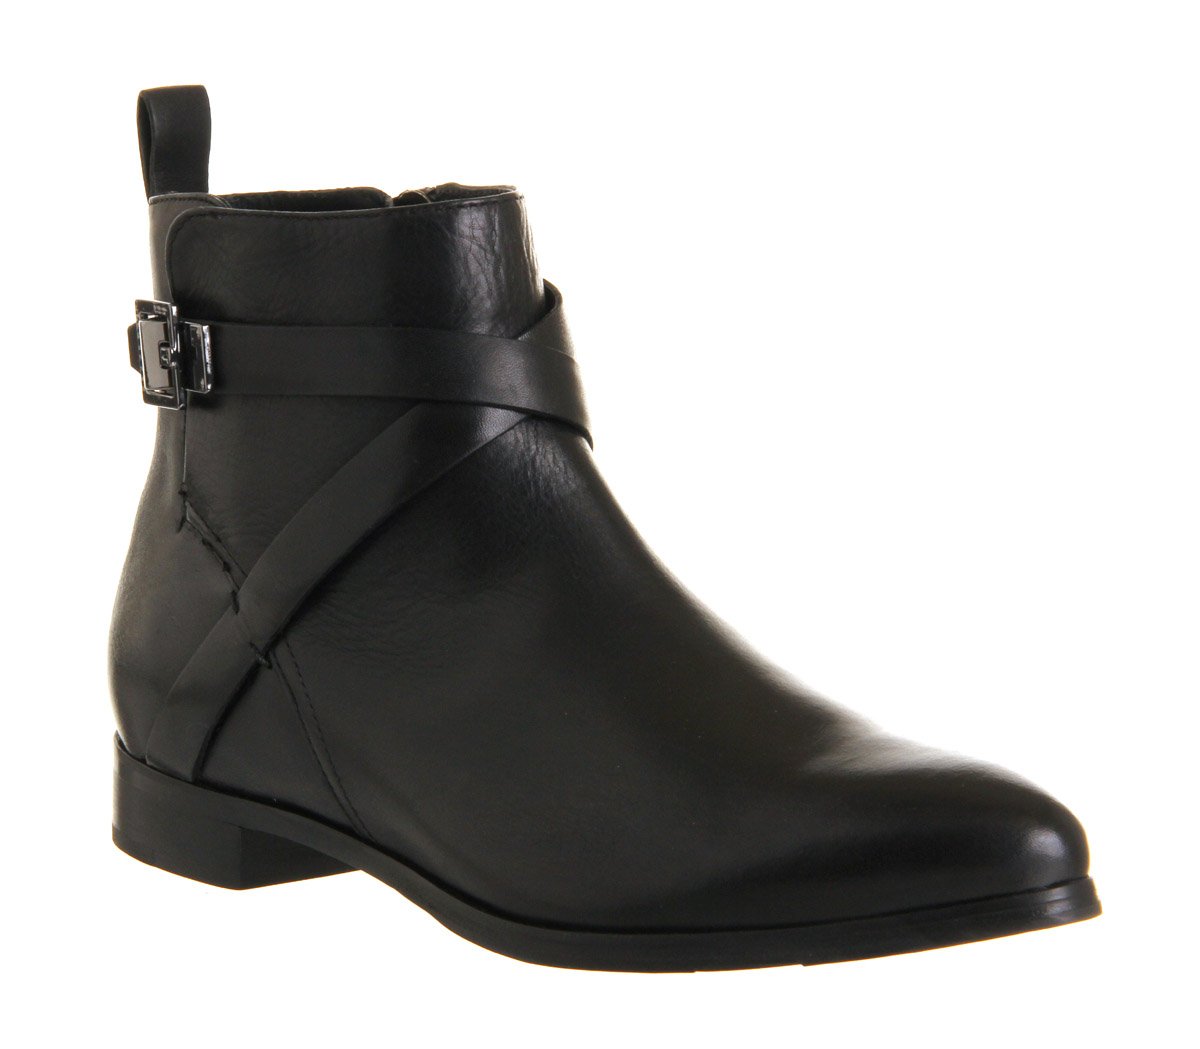 Ted BakerKalay Strap bootsBlack Leather